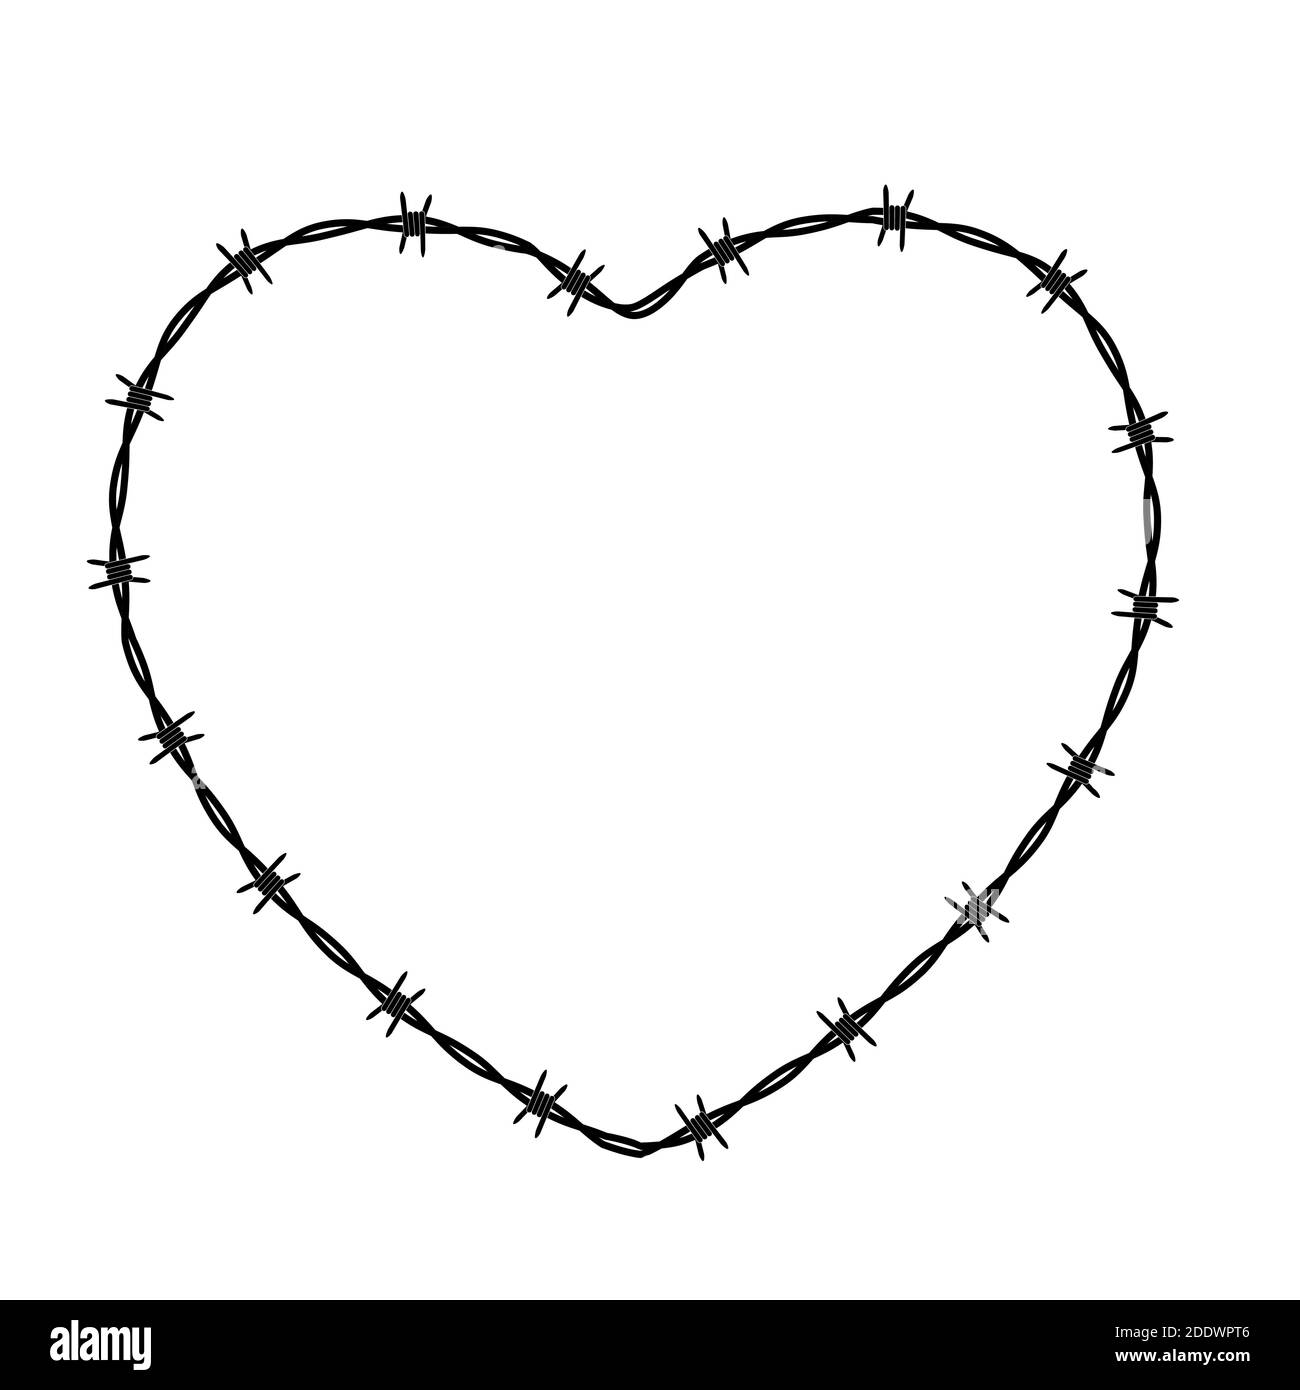 Heart Shaped conclusion symbol, sign. Barbed wire isolated on white background. Vector Illustration EPS10 Stock Vector